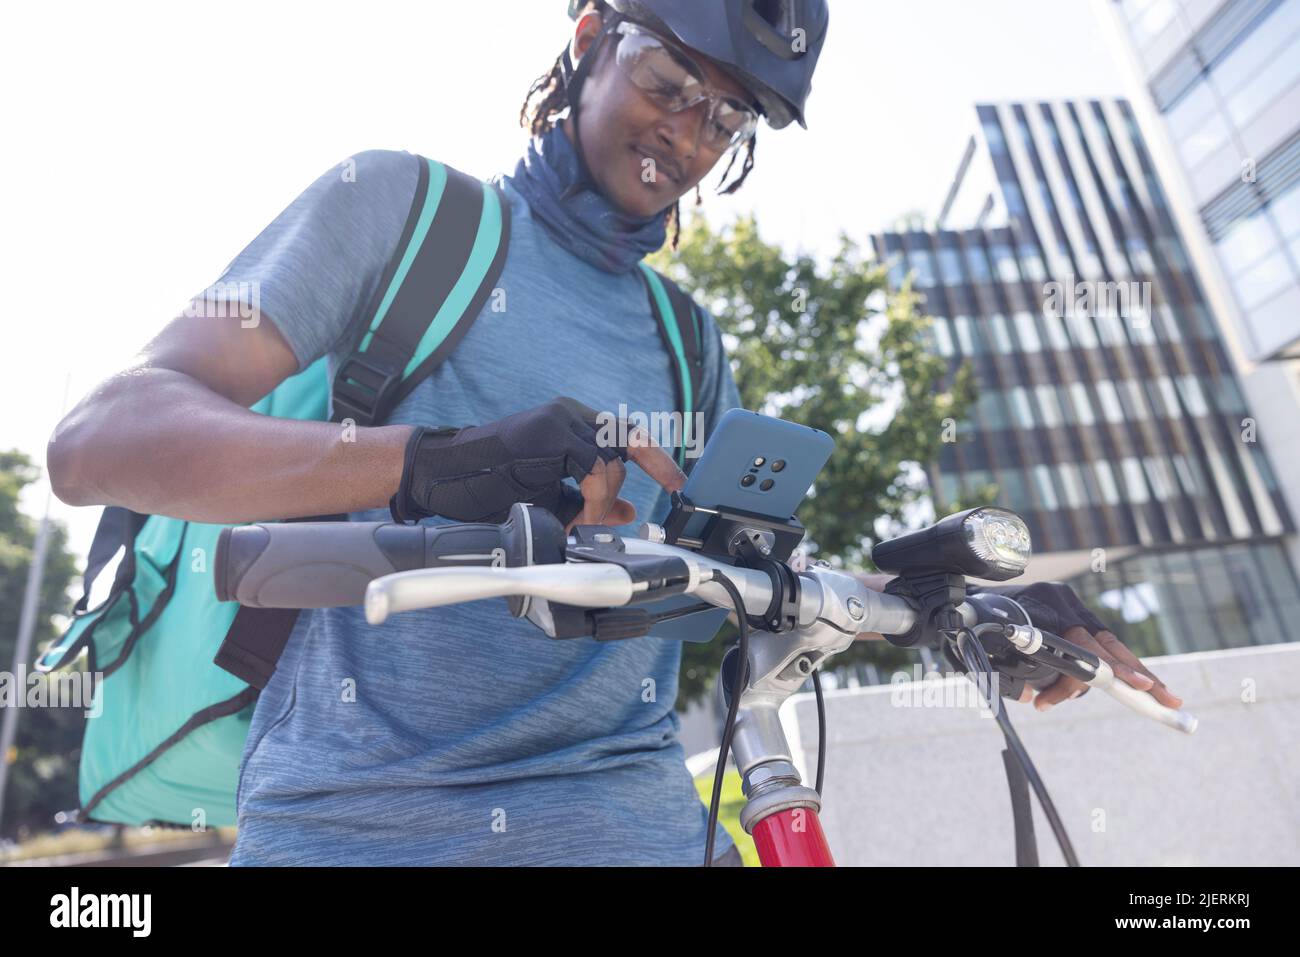 Courier On Bike Delivering Takeaway Food In City Checking Directions And Order Details On Mobile Phone Stock Photo